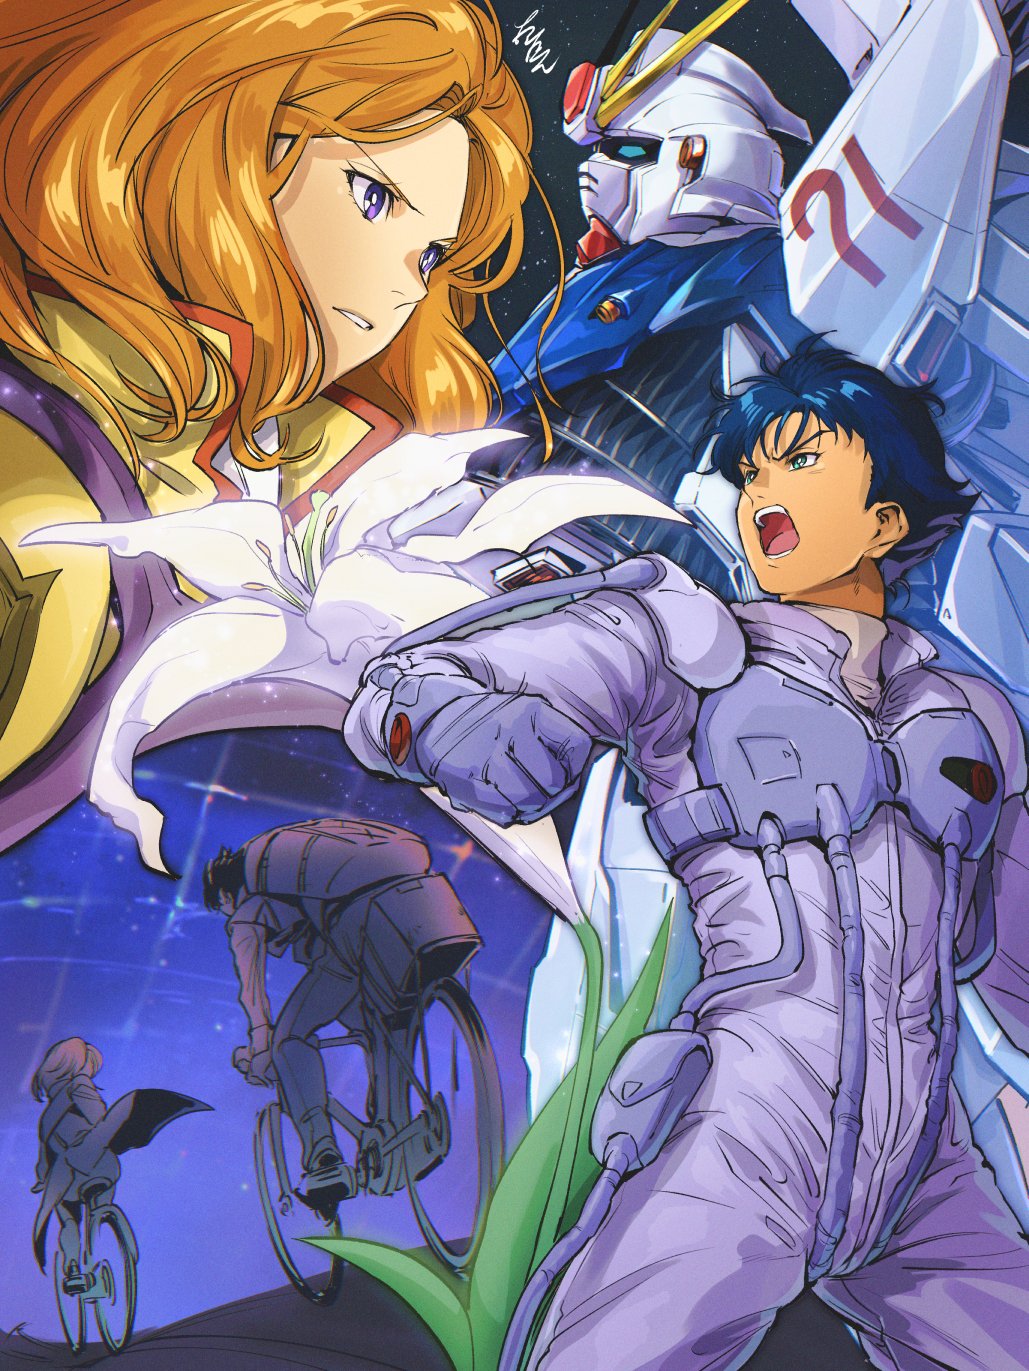 1boy 1girl backpack bag bicycle blue_eyes blue_hair cecily_fairchild chanmura clenched_hand f91_gundam flower gloves grey_gloves grey_shirt ground_vehicle gundam gundam_f91 hair_behind_ear highres jumpsuit looking_ahead mecha mobile_suit multiple_views orange_hair pants parted_lips purple_eyes purple_jumpsuit riding riding_bicycle robot seabook_arno shirt short_hair space v-fin v-shaped_eyebrows white_flower white_shirt yellow_jumpsuit